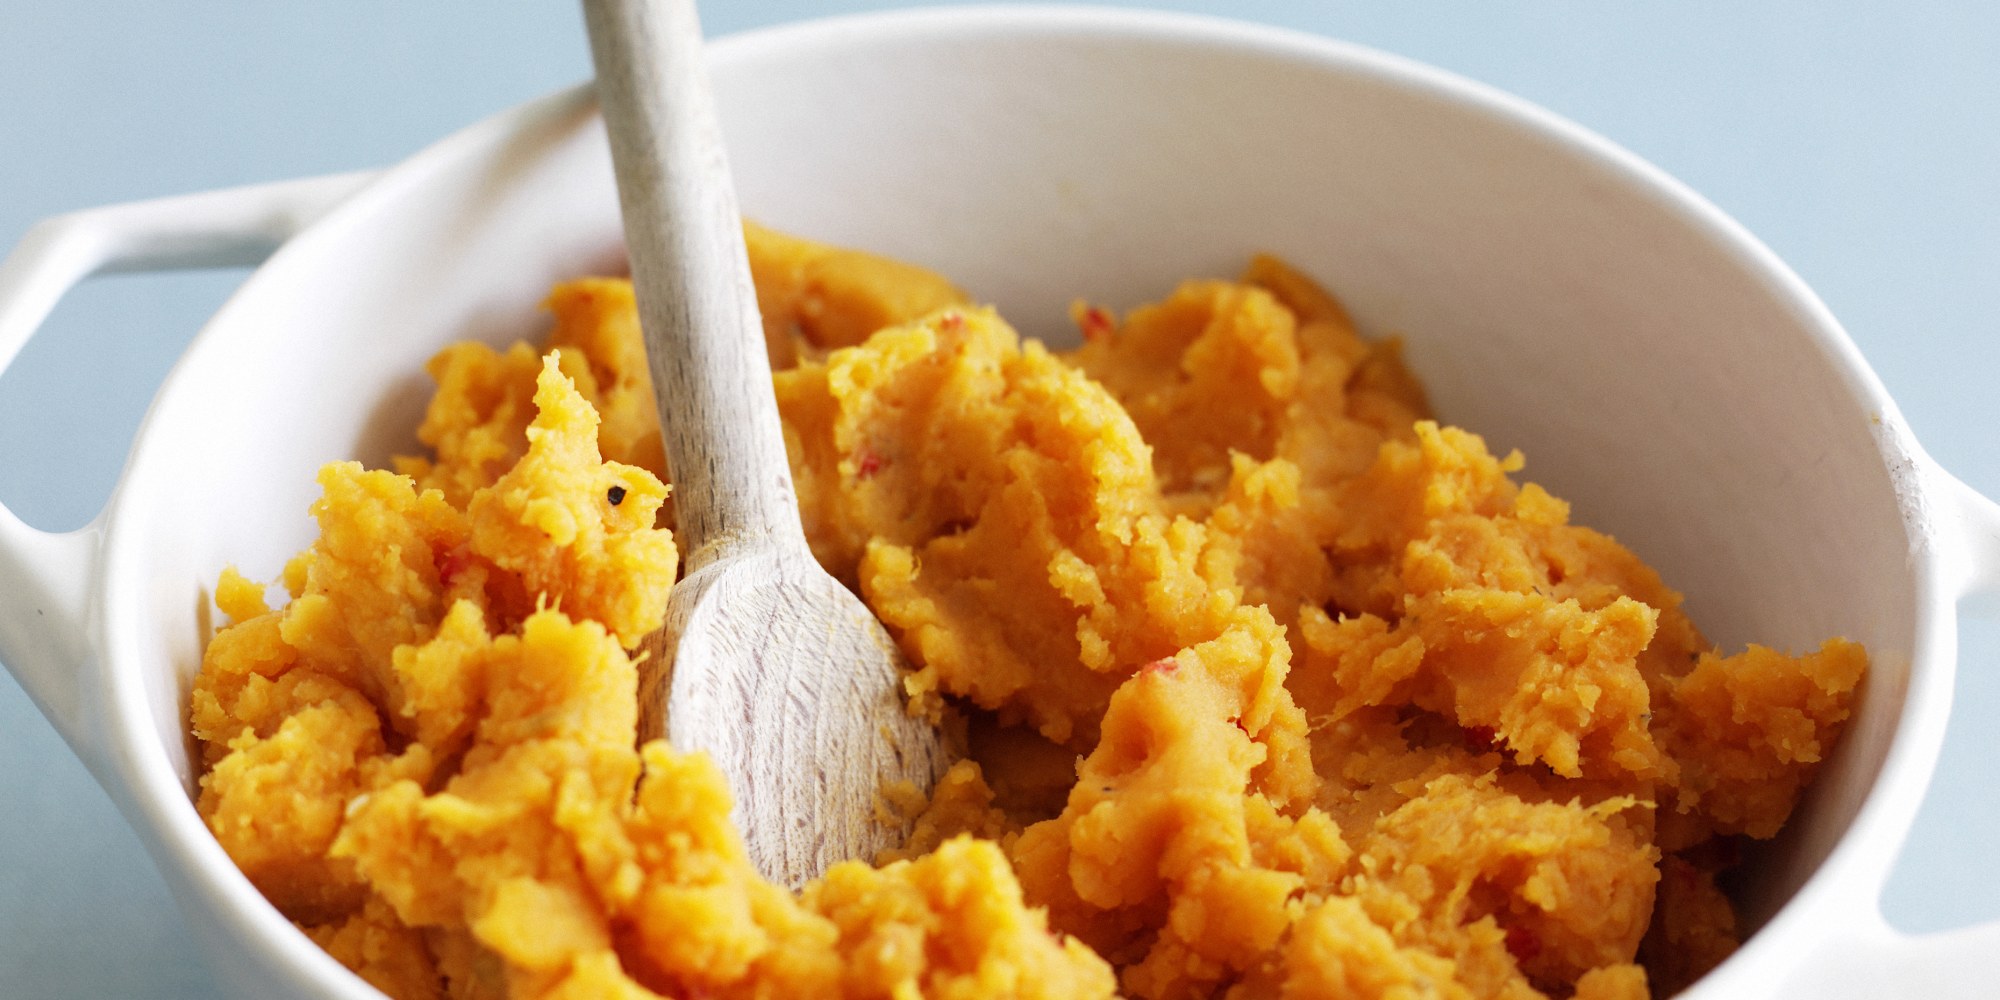 Classic Mashed Sweet Potatoes Recipe with Cinnamon and Nutmeg